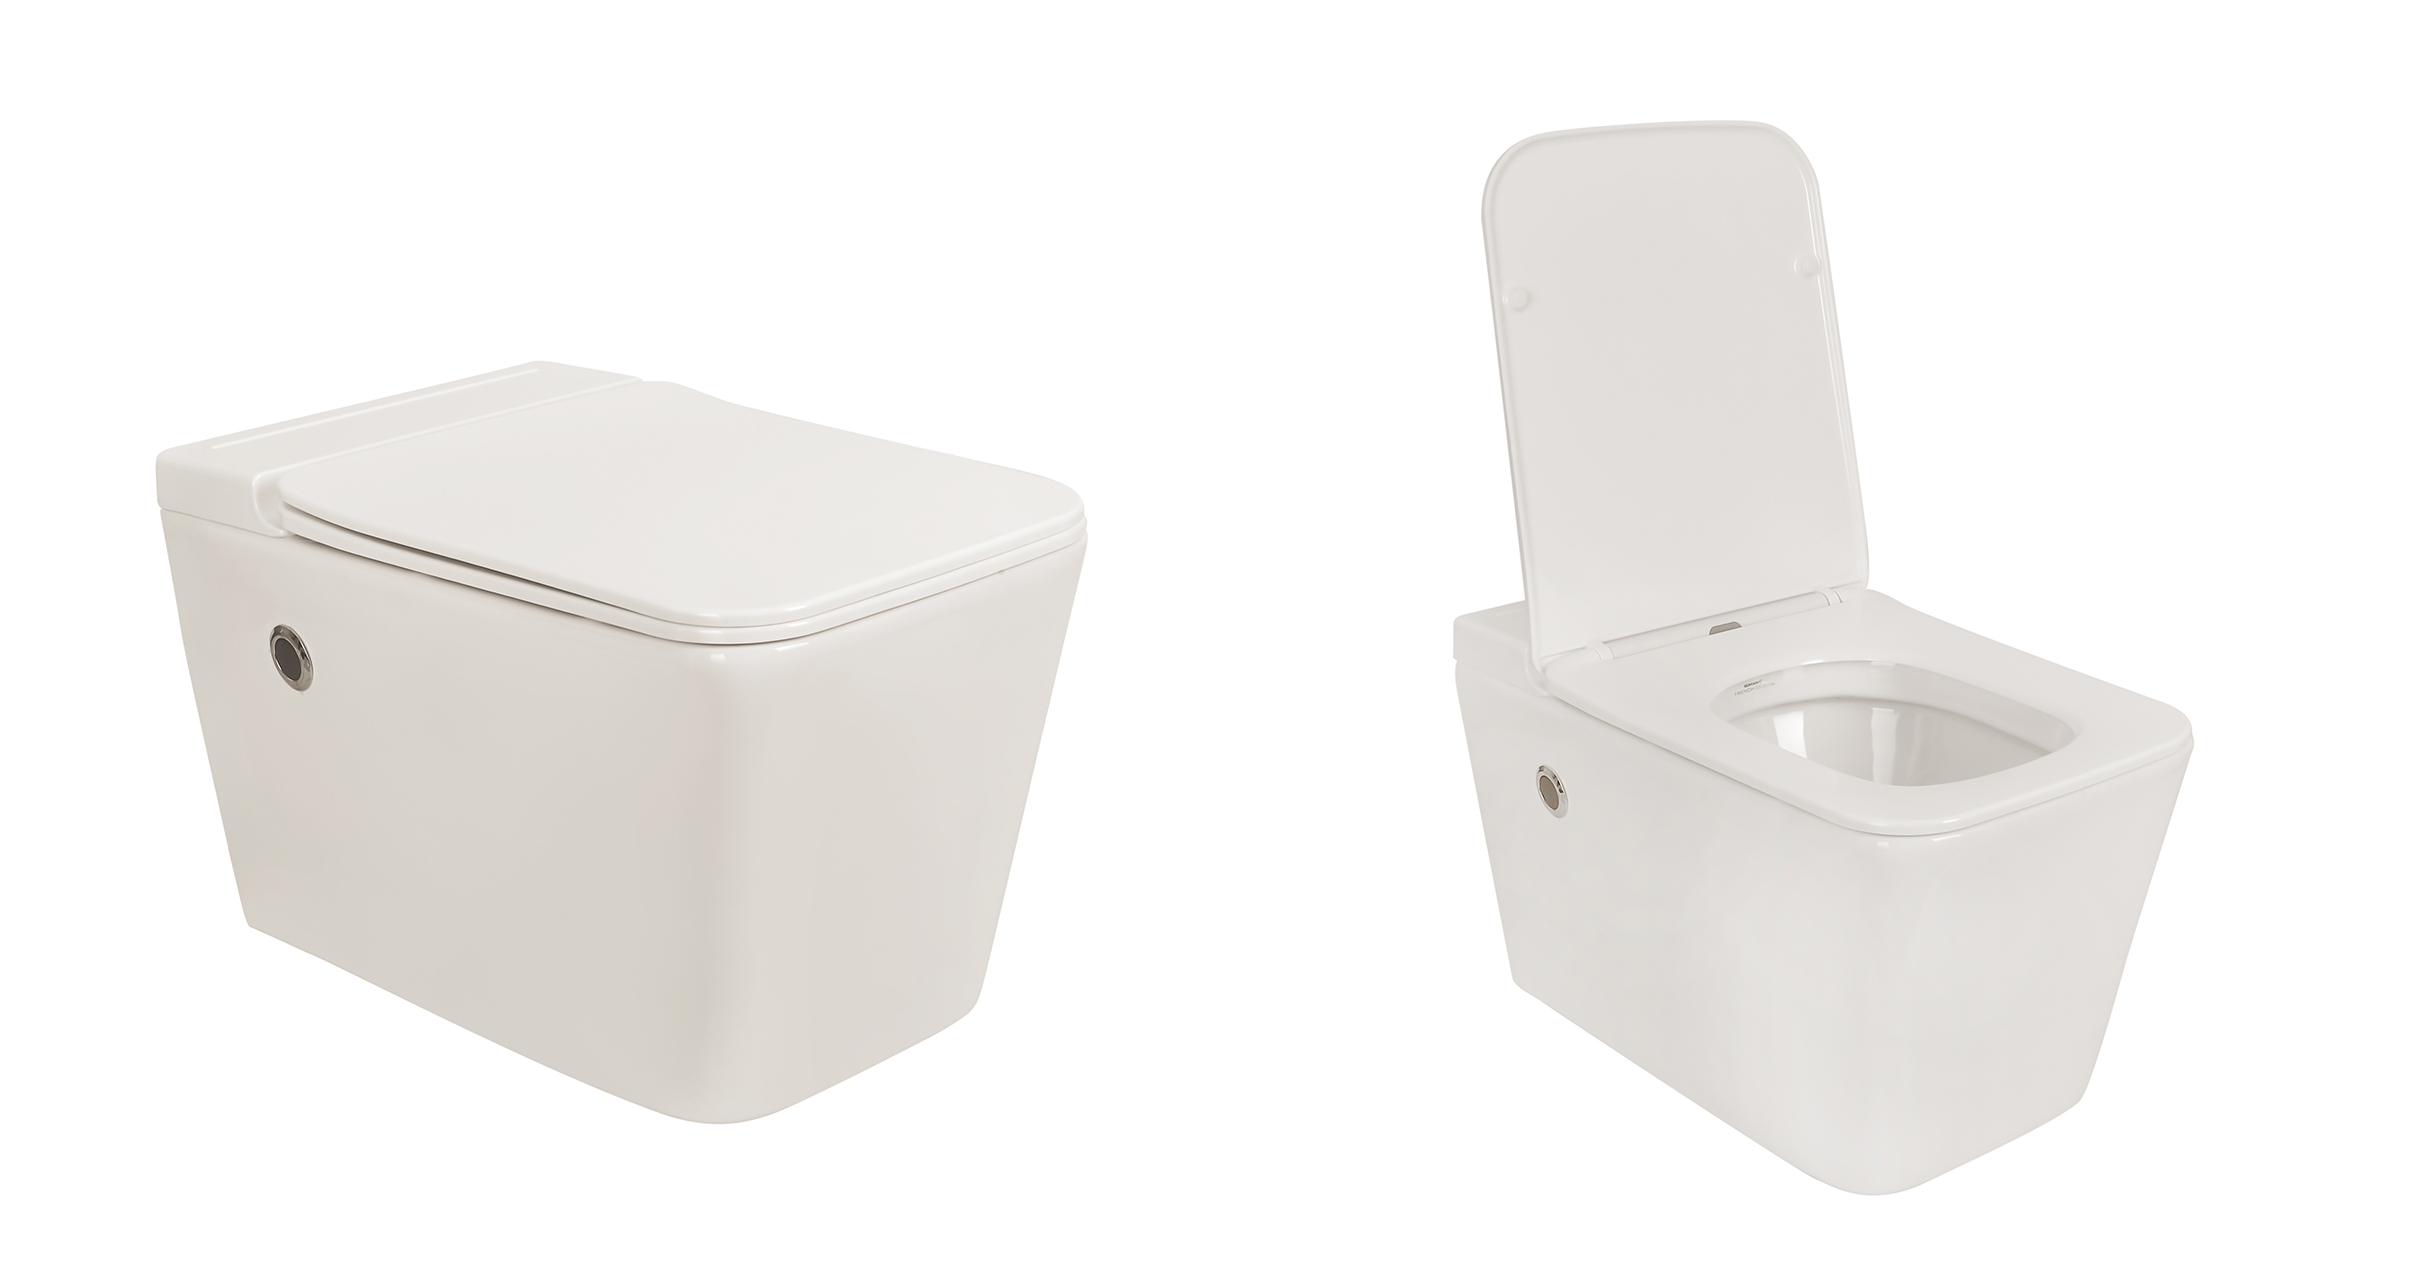 Somany introduces ‘Tankless Wall Hung Toilet- ELYSEES